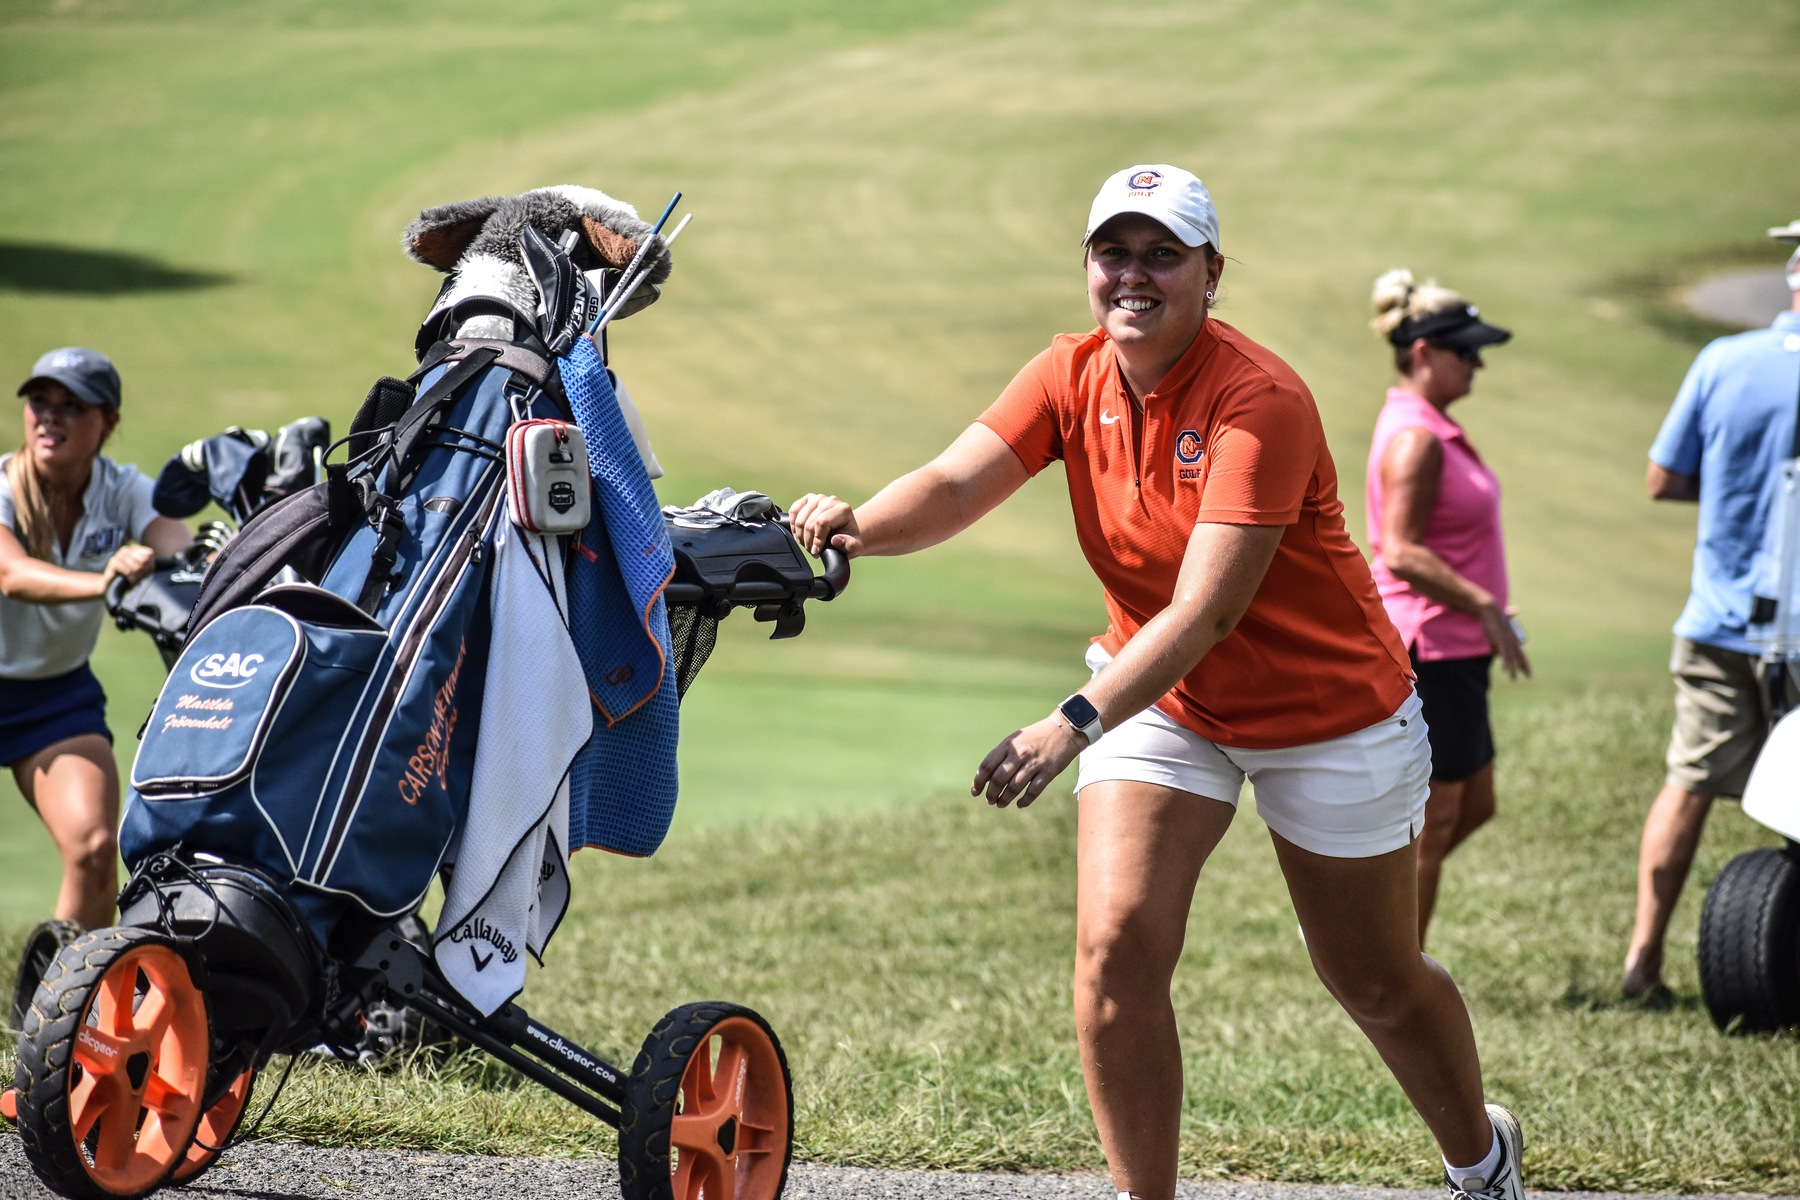 Low Country Invitational debut ahead for Eagles this week